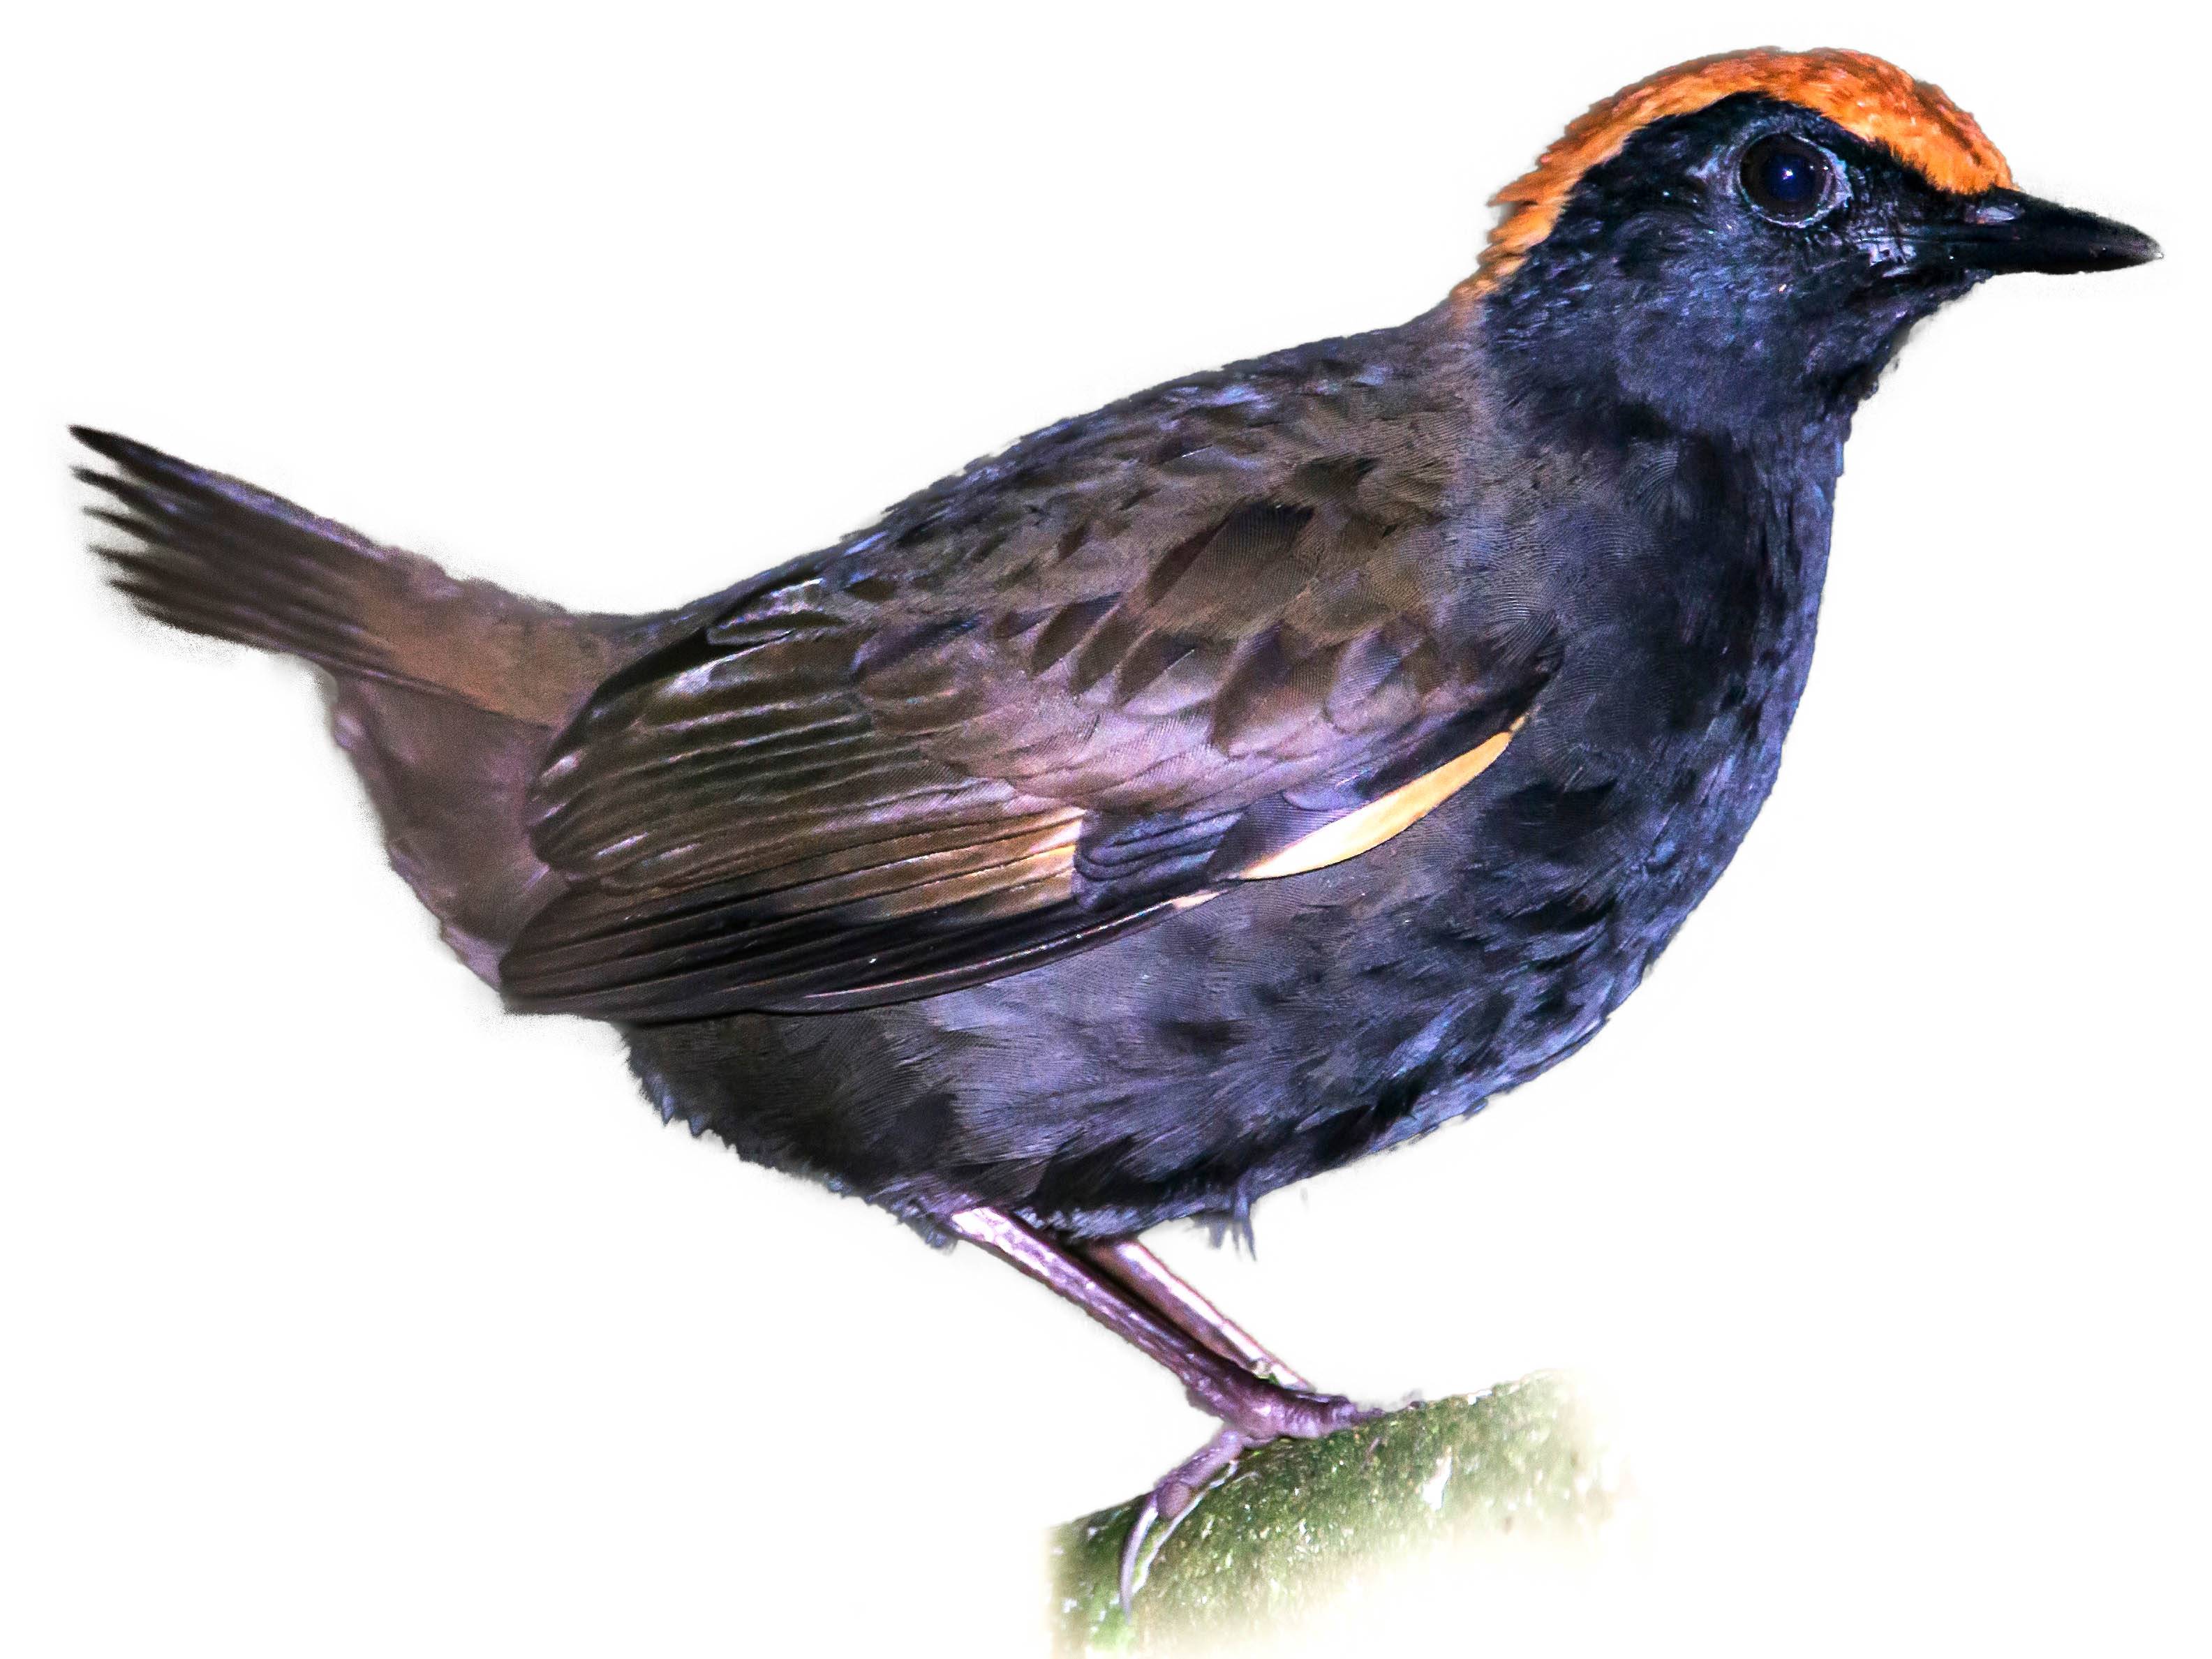 A photo of a Rufous-capped Antthrush (Formicarius colma)